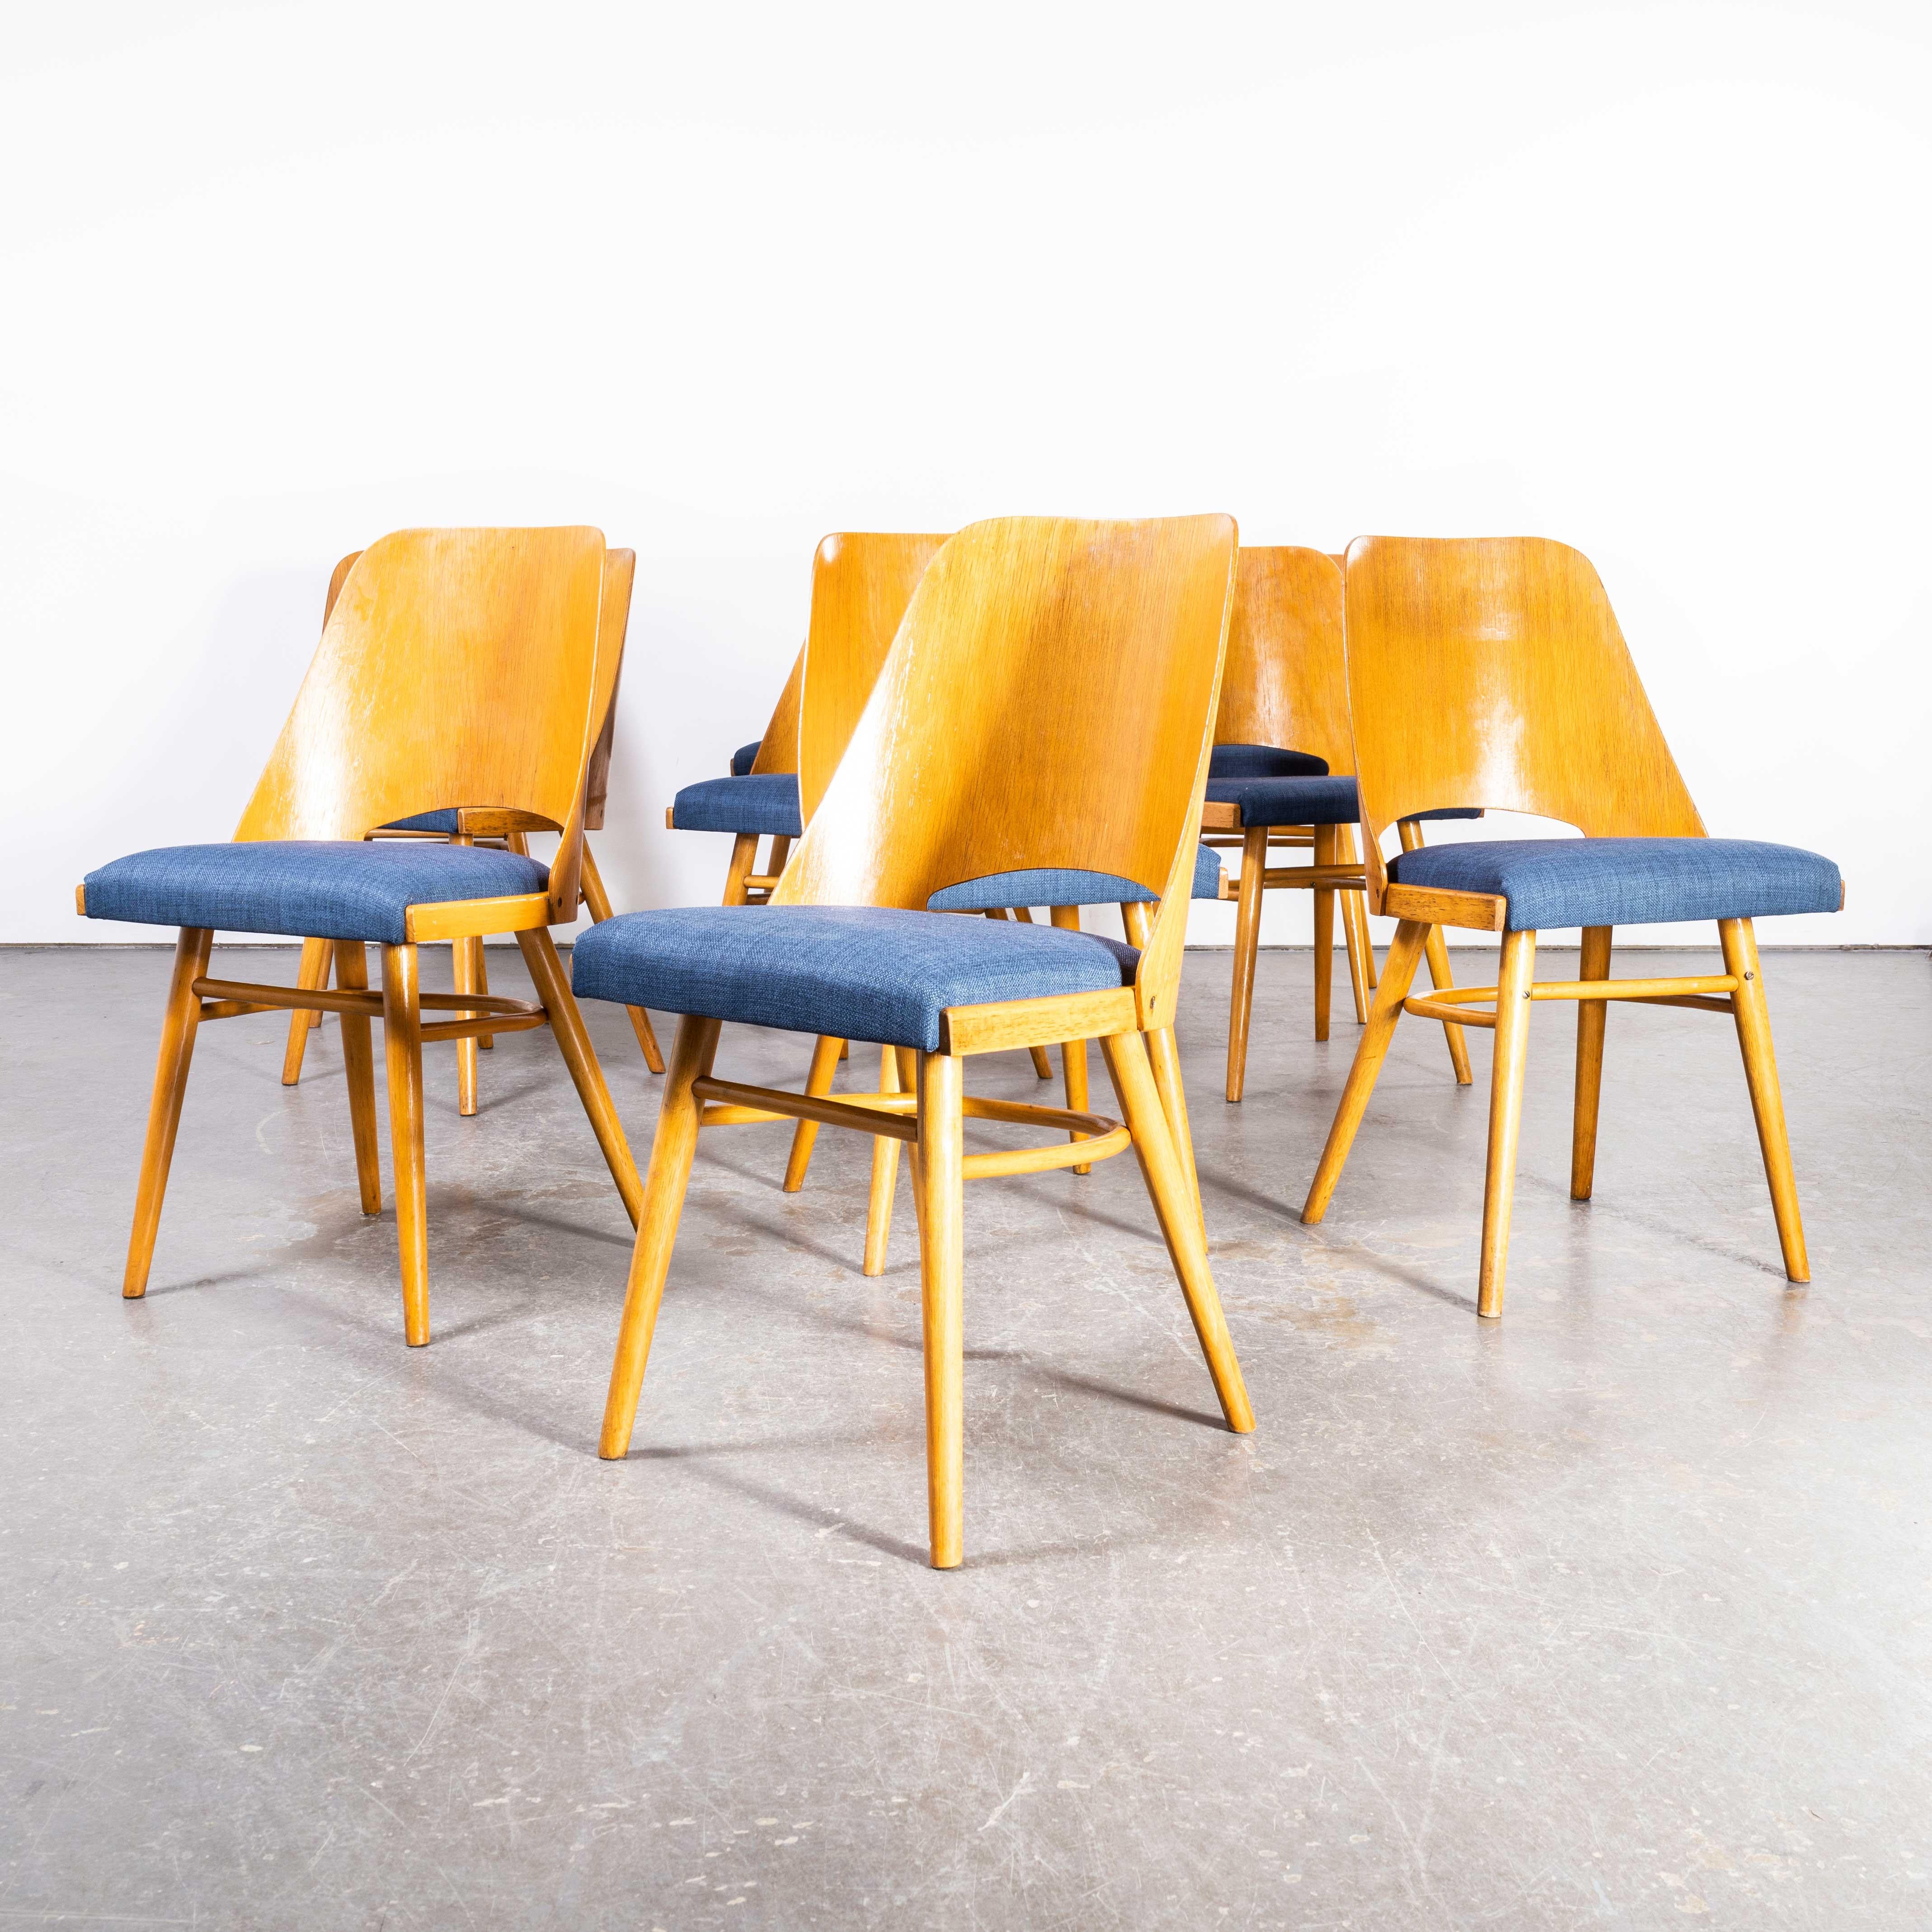 1950's Re -Upholstered Thon Light Oak Chairs By Radomir Hoffman - Set Of Ten For Sale 5